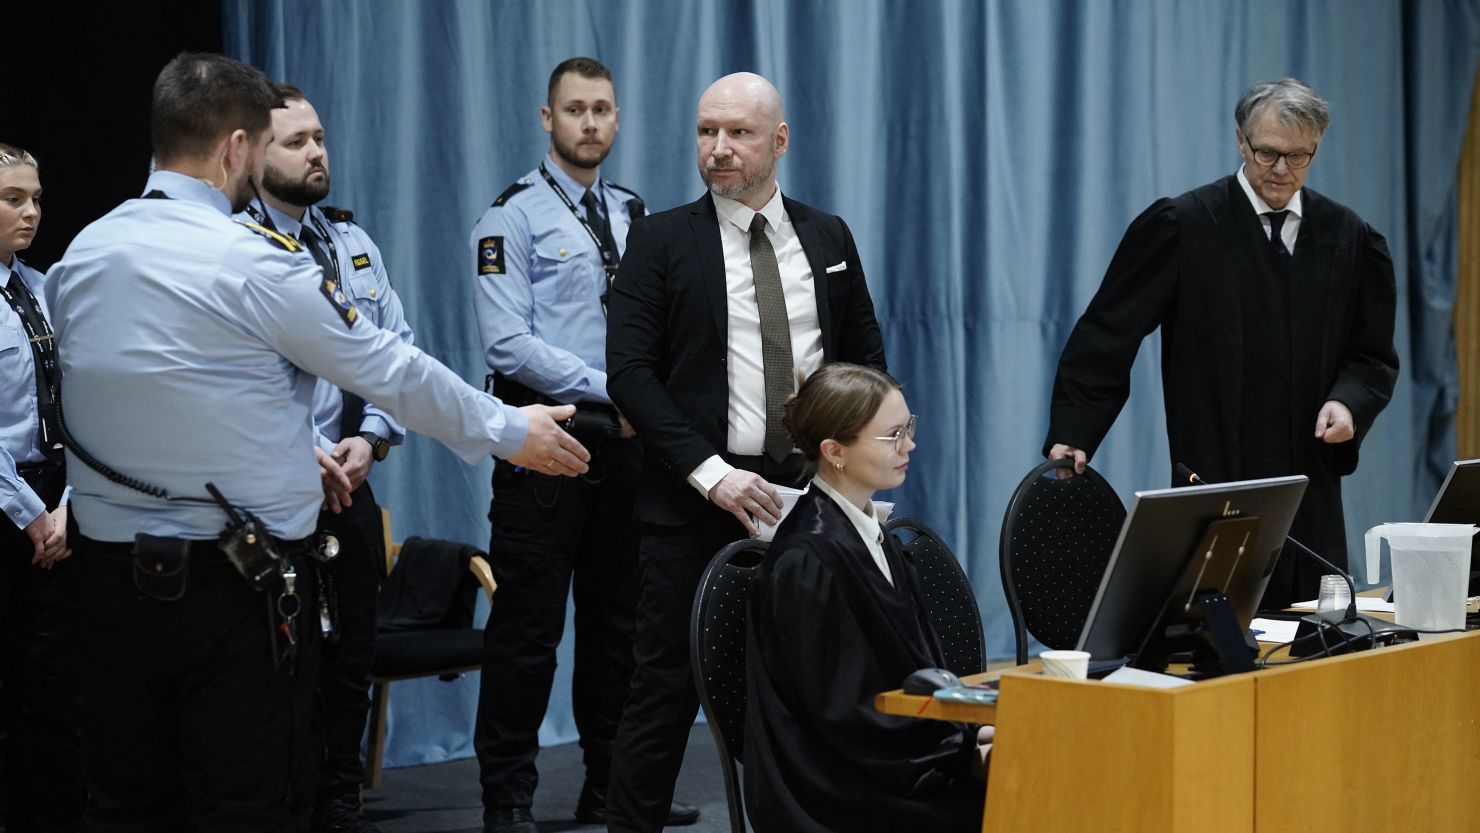 Anders Behring Breivik (3rd R) enters a courtroom at Ringerike prison before the start of his trial over his prison conditions, on January 8, 2024 in Tyristrand, Norway. Breivik, who killed 77 people in a bombing and shooting rampage in 2011 and who has been held apart from other inmates for 12 years, has sued the state for a second time arguing that his isolation is a violation of the European Convention on Human Rights. (Photo by Cornelius Poppe/NTB/AFP) / Norway OUT (Photo by CORNELIUS POPPE/NTB/AFP via Getty Images)